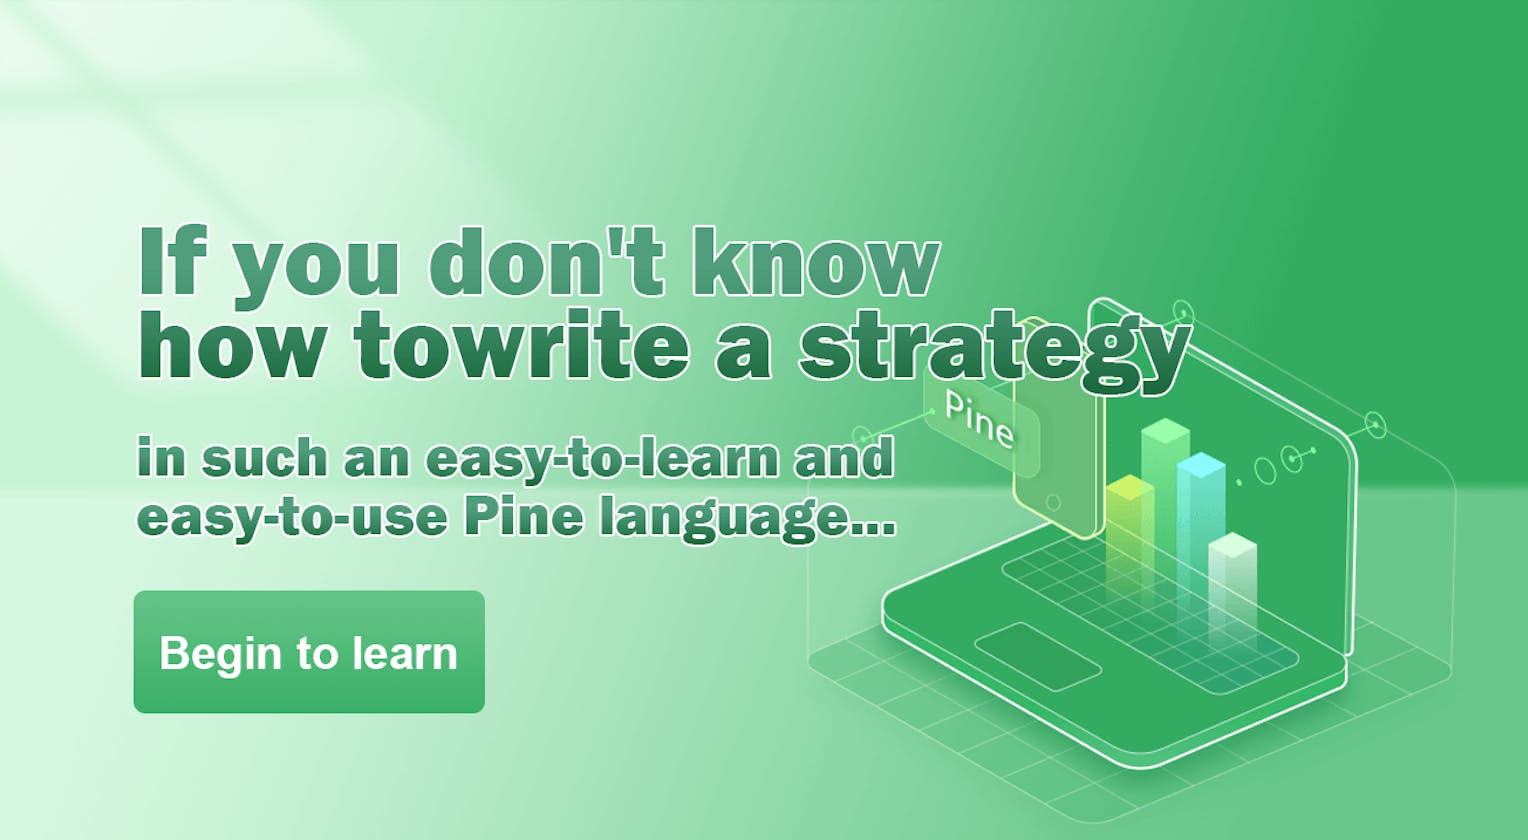 If you don't know how to write a strategy in such an easy-to-learn and easy-to-use Pine language...